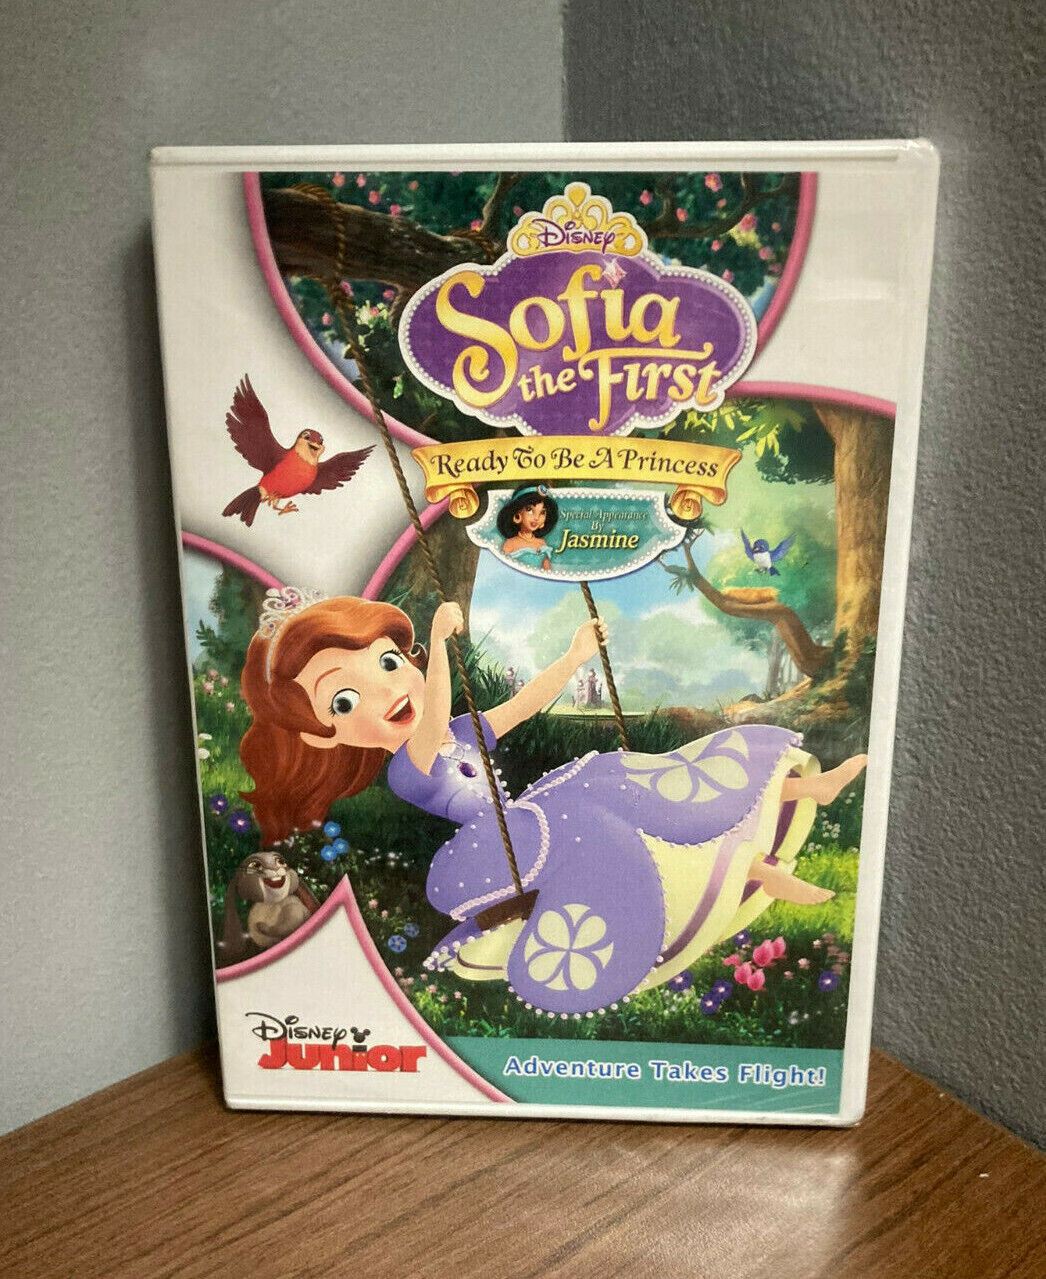 Sofia the First: Ready to Be a Princess (Disney DVD, 2013) - NEW - Free  Shipping 786936836035 | eBay